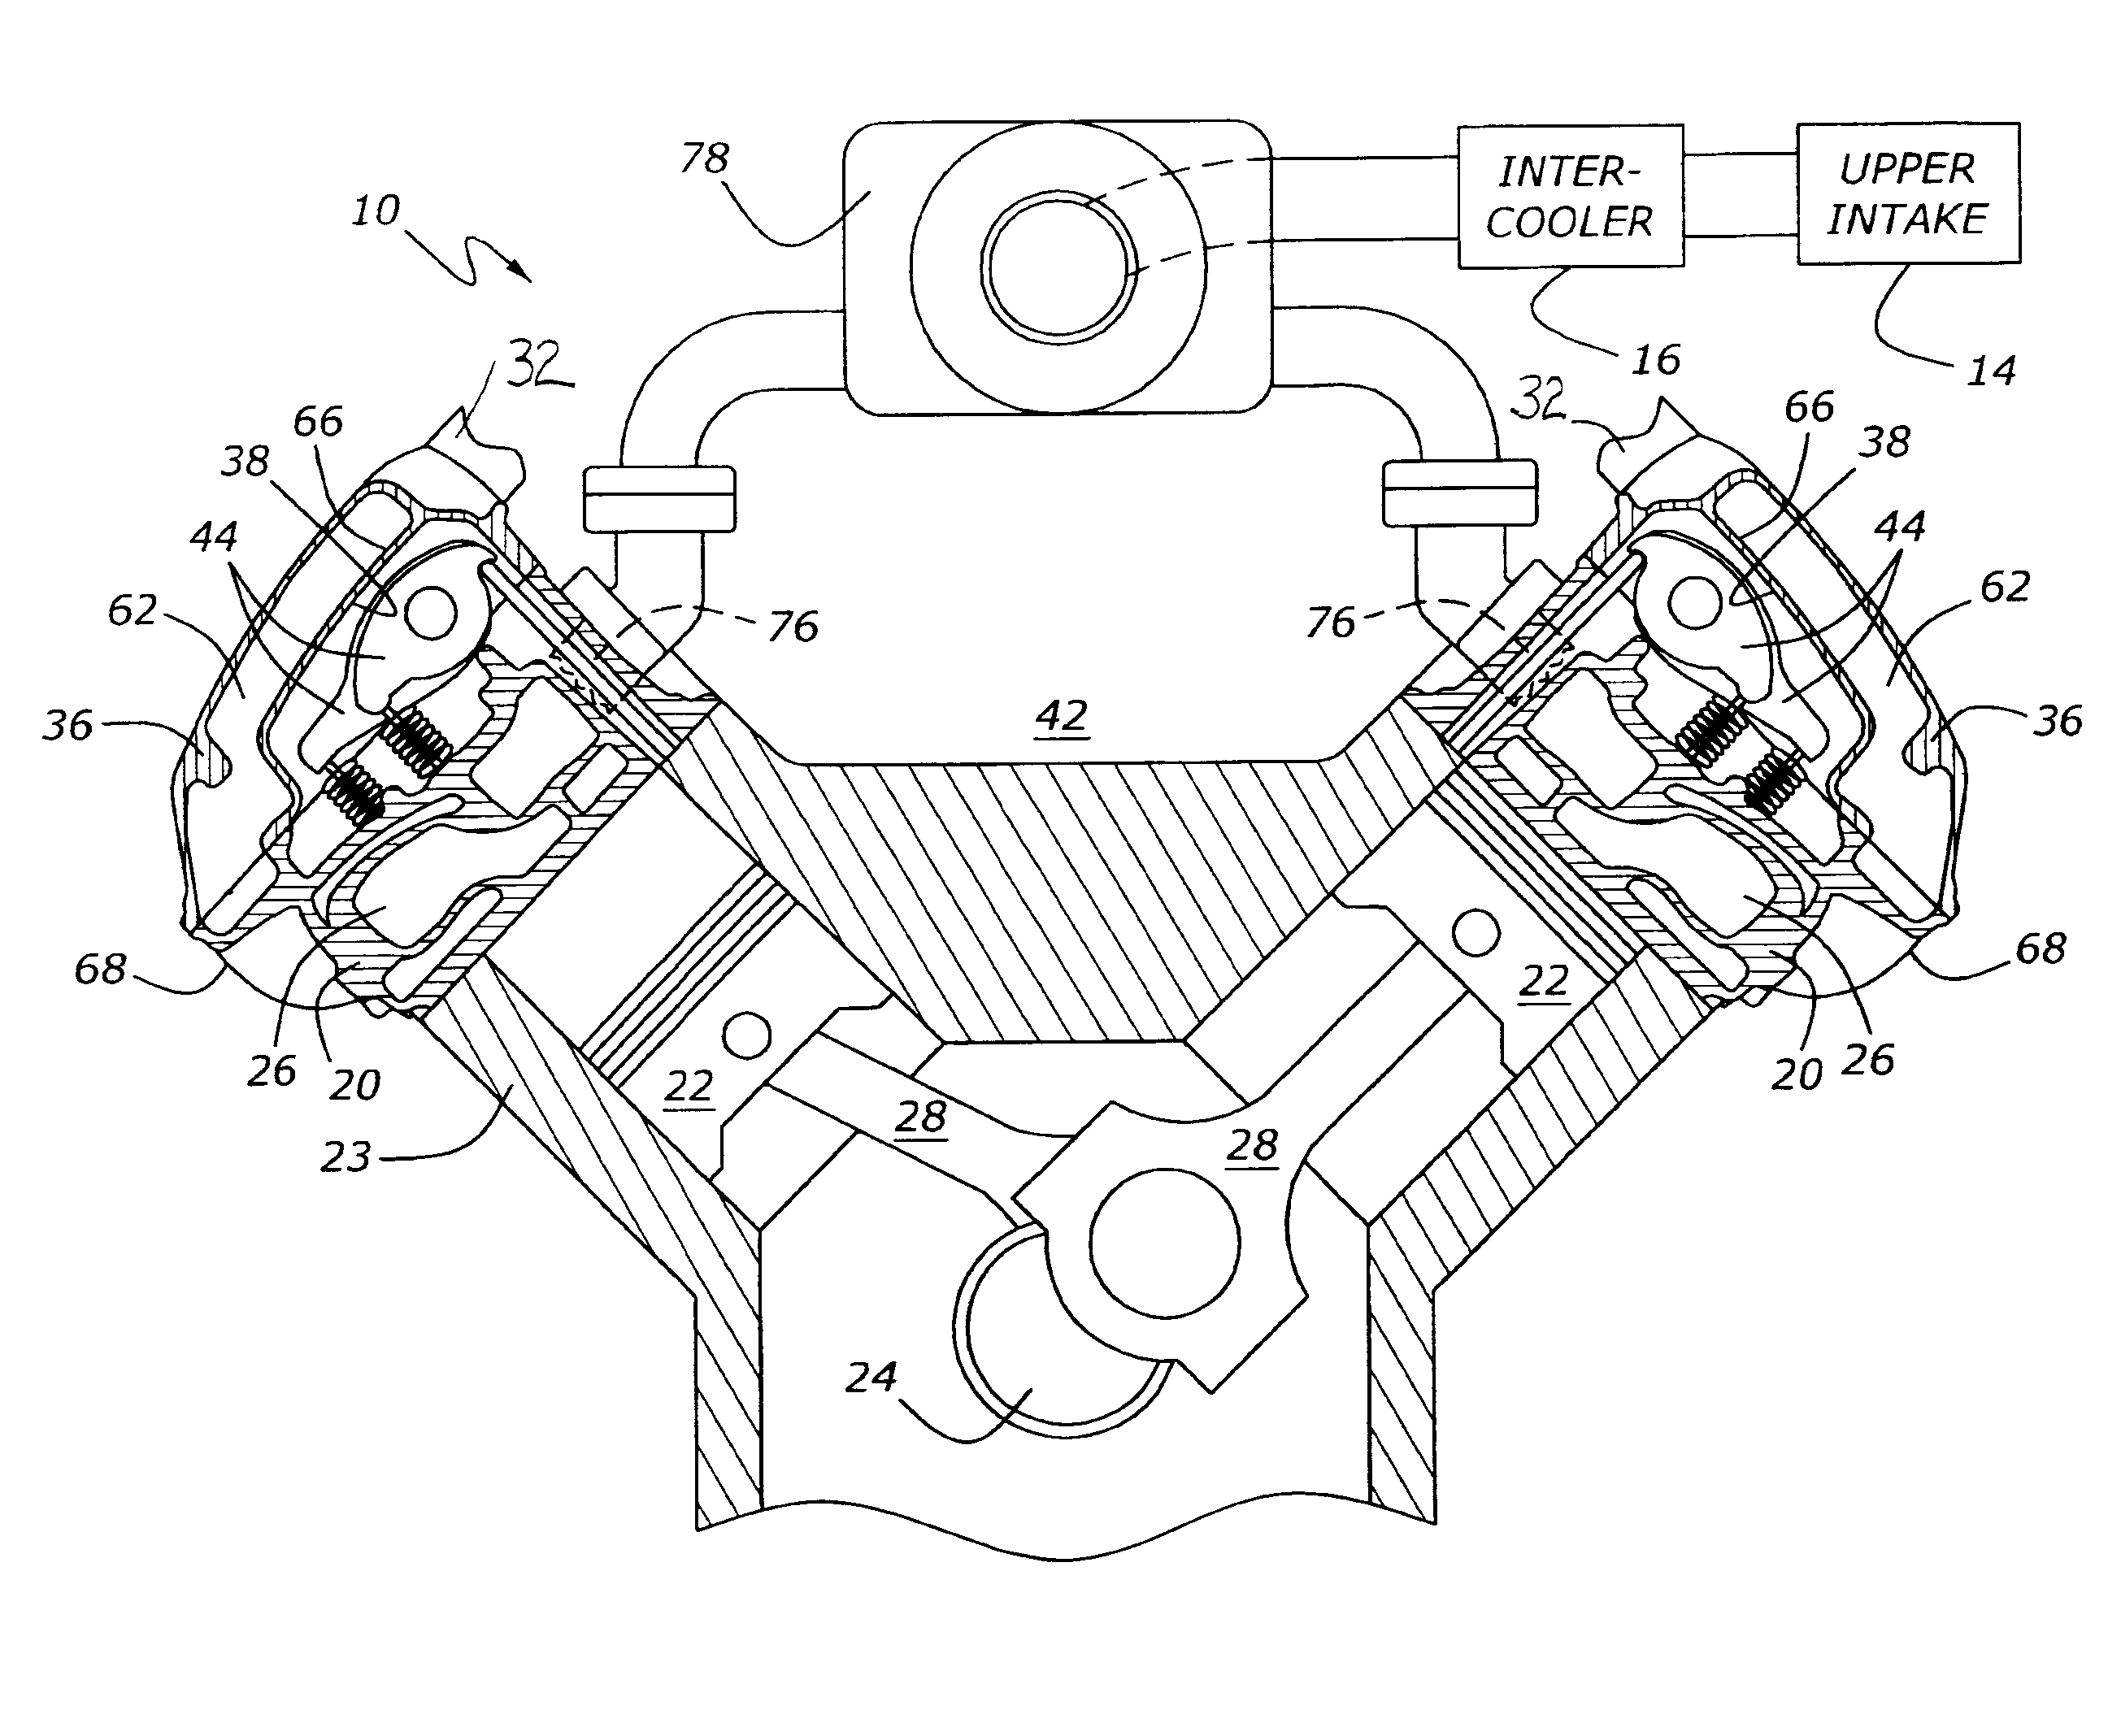 Induction system for internal combustion engine